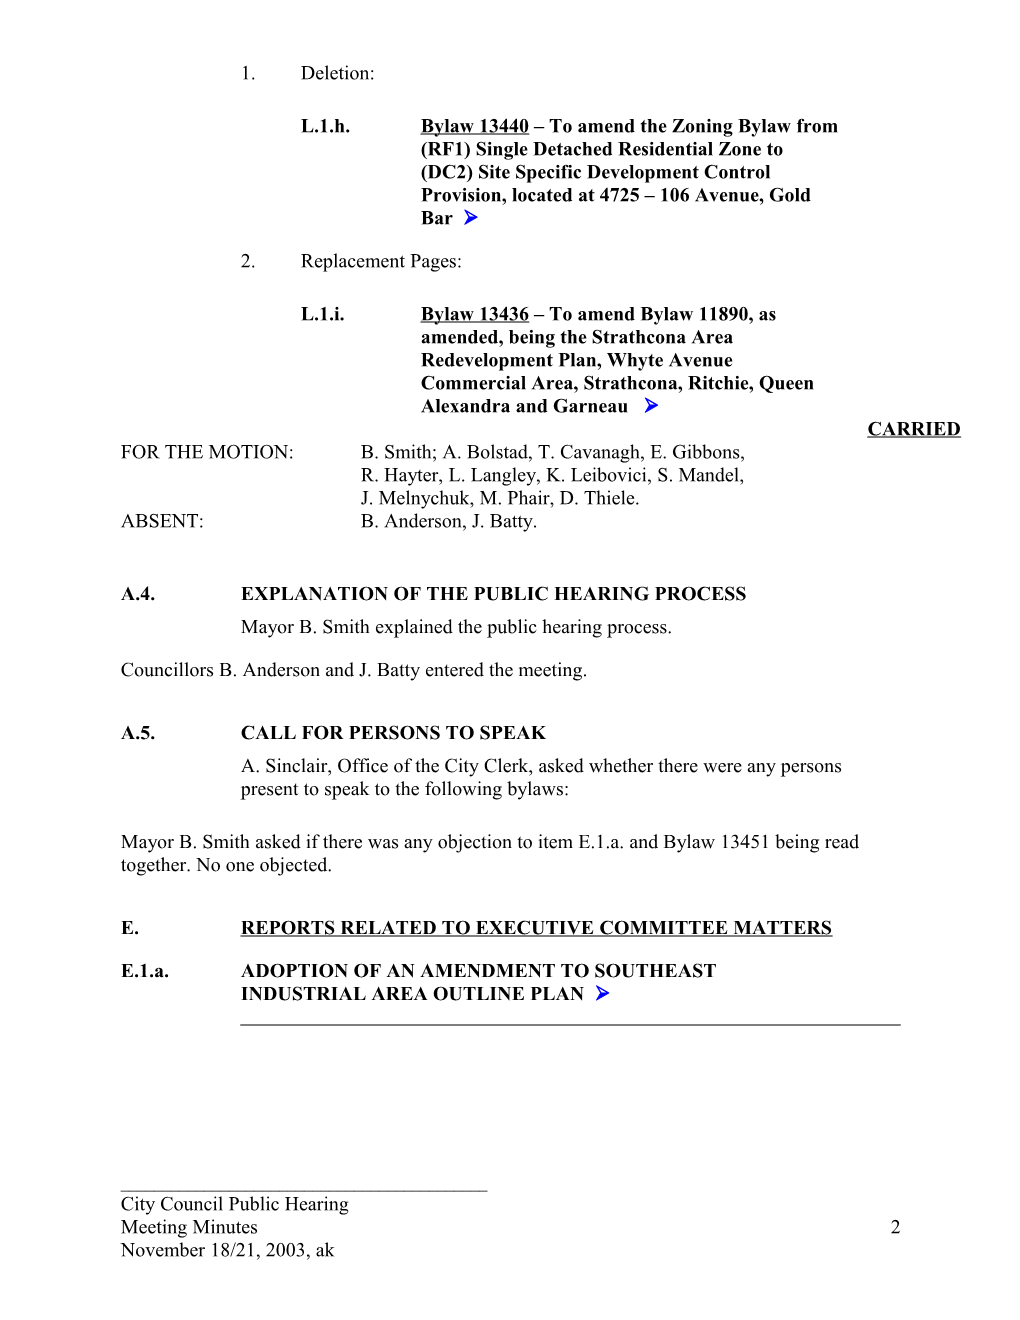 Minutes for City Council November 18, 2003 Meeting